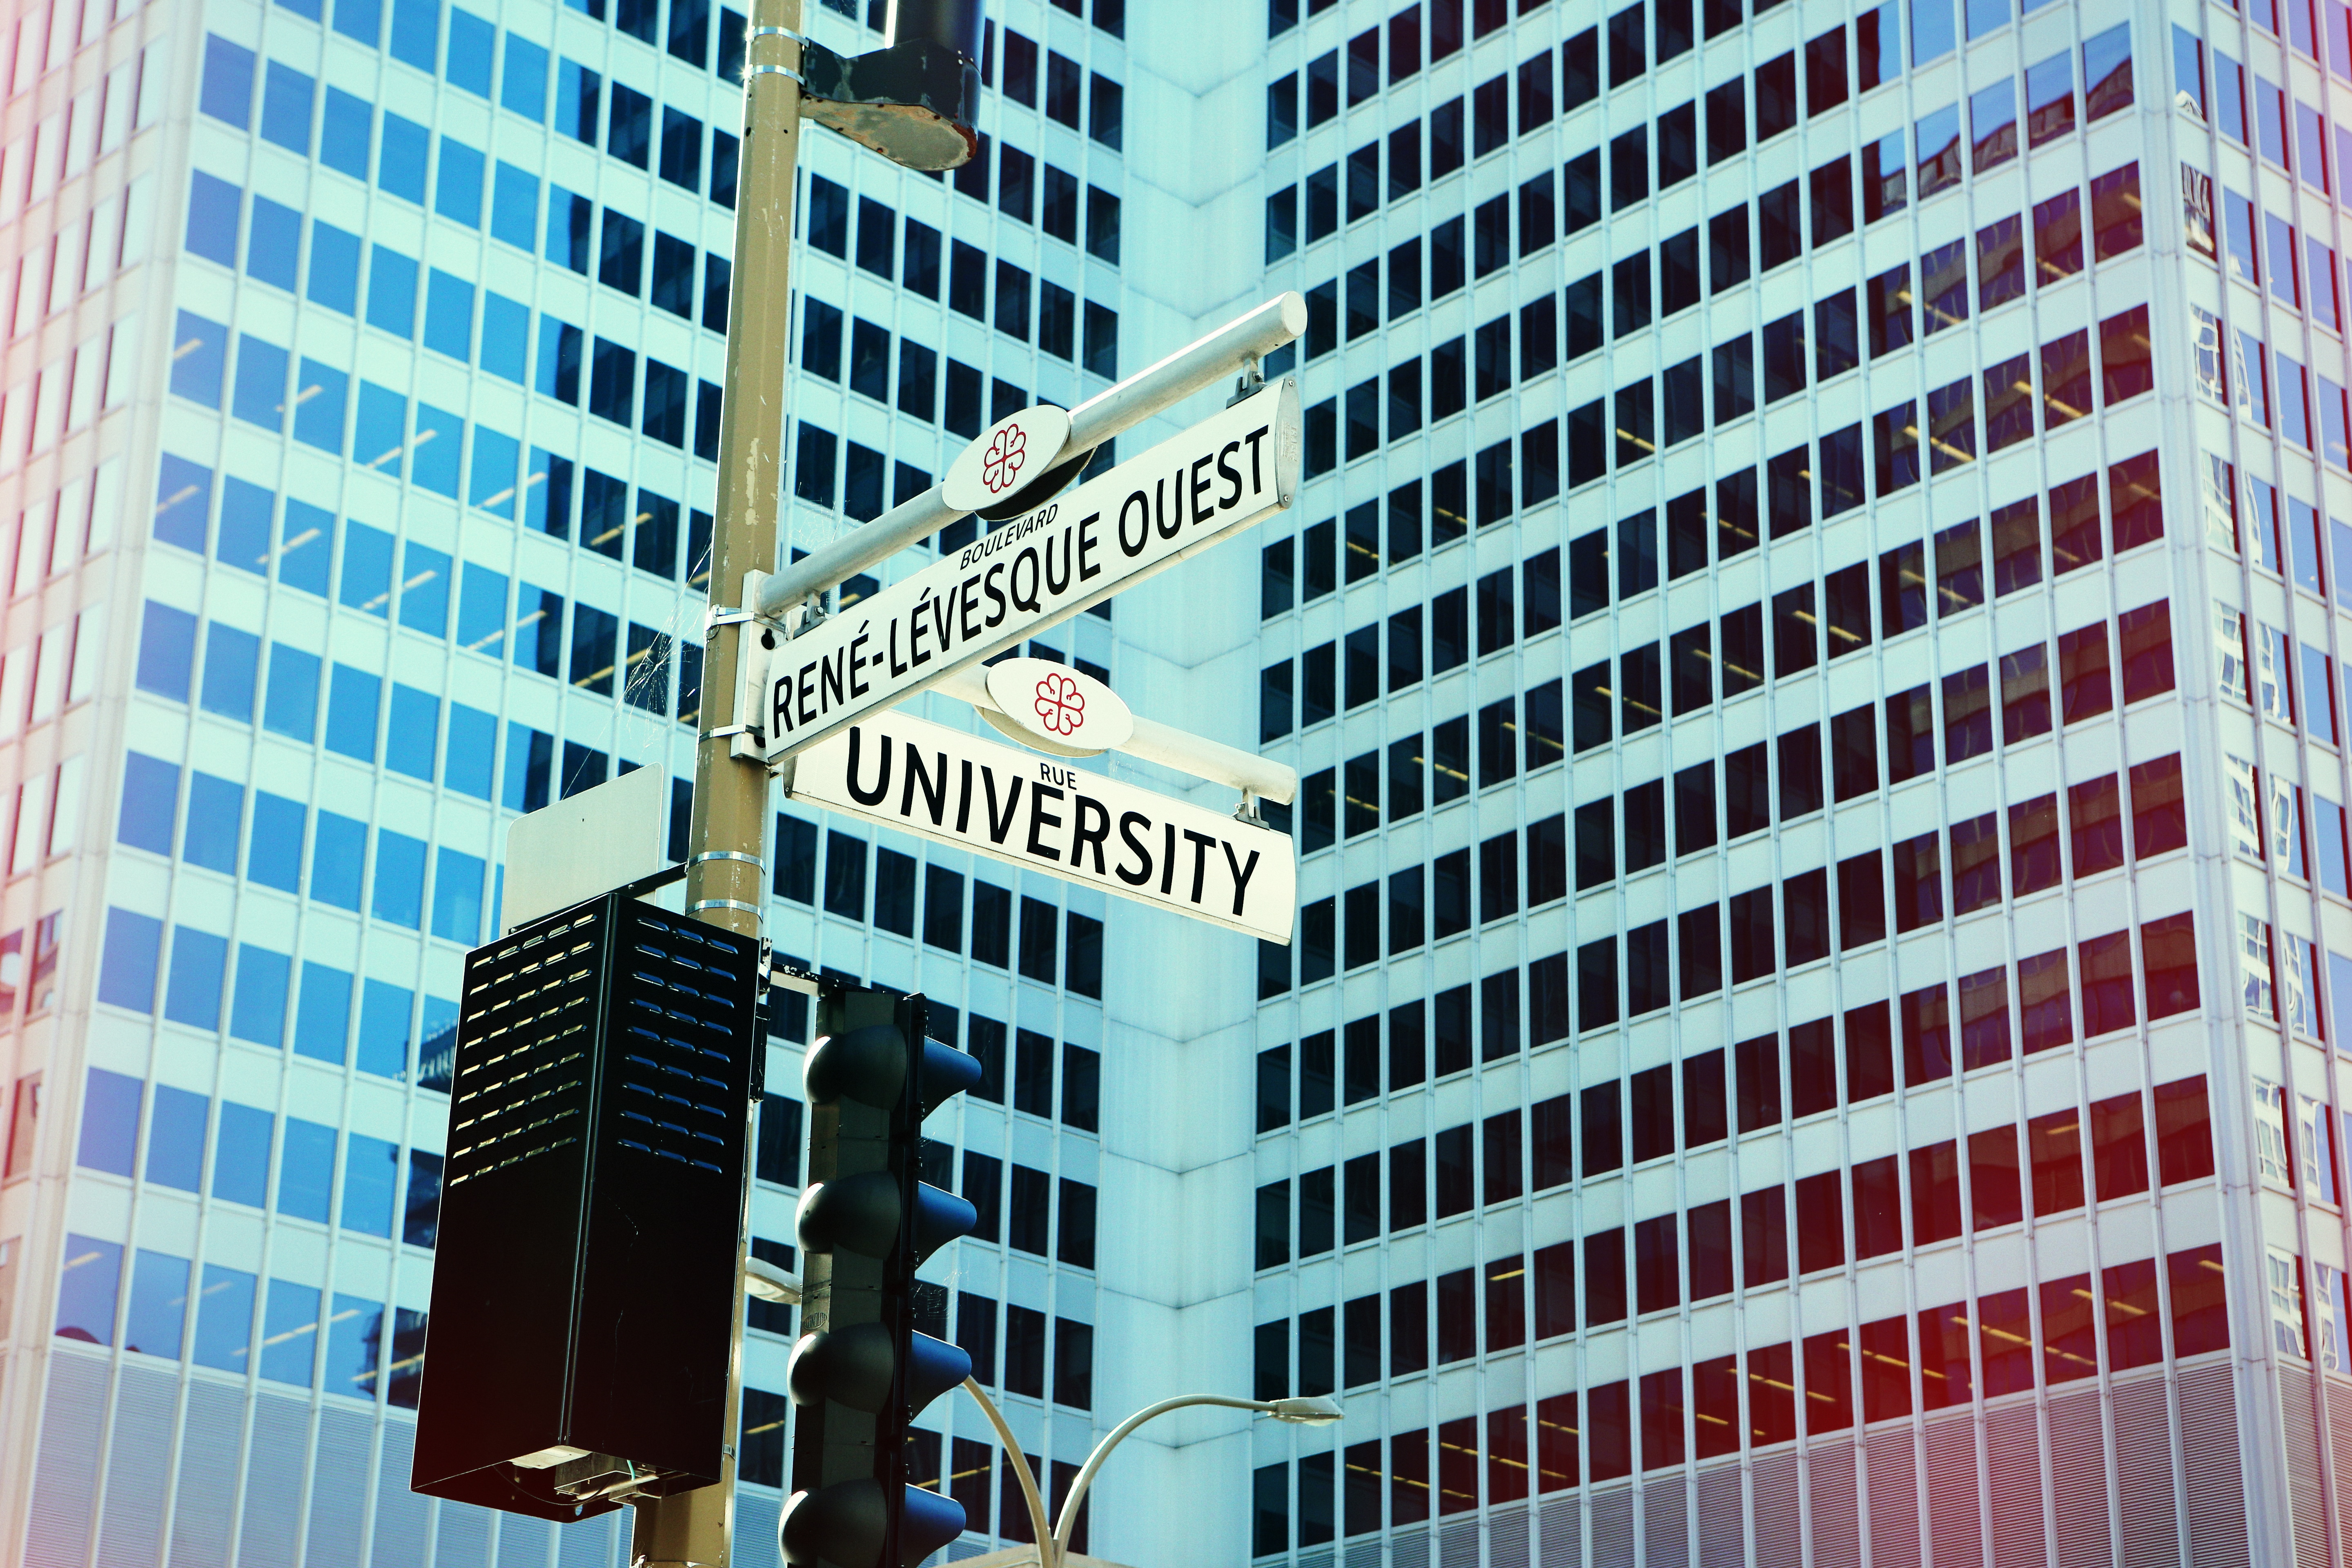 rene levesque ouest and university signage